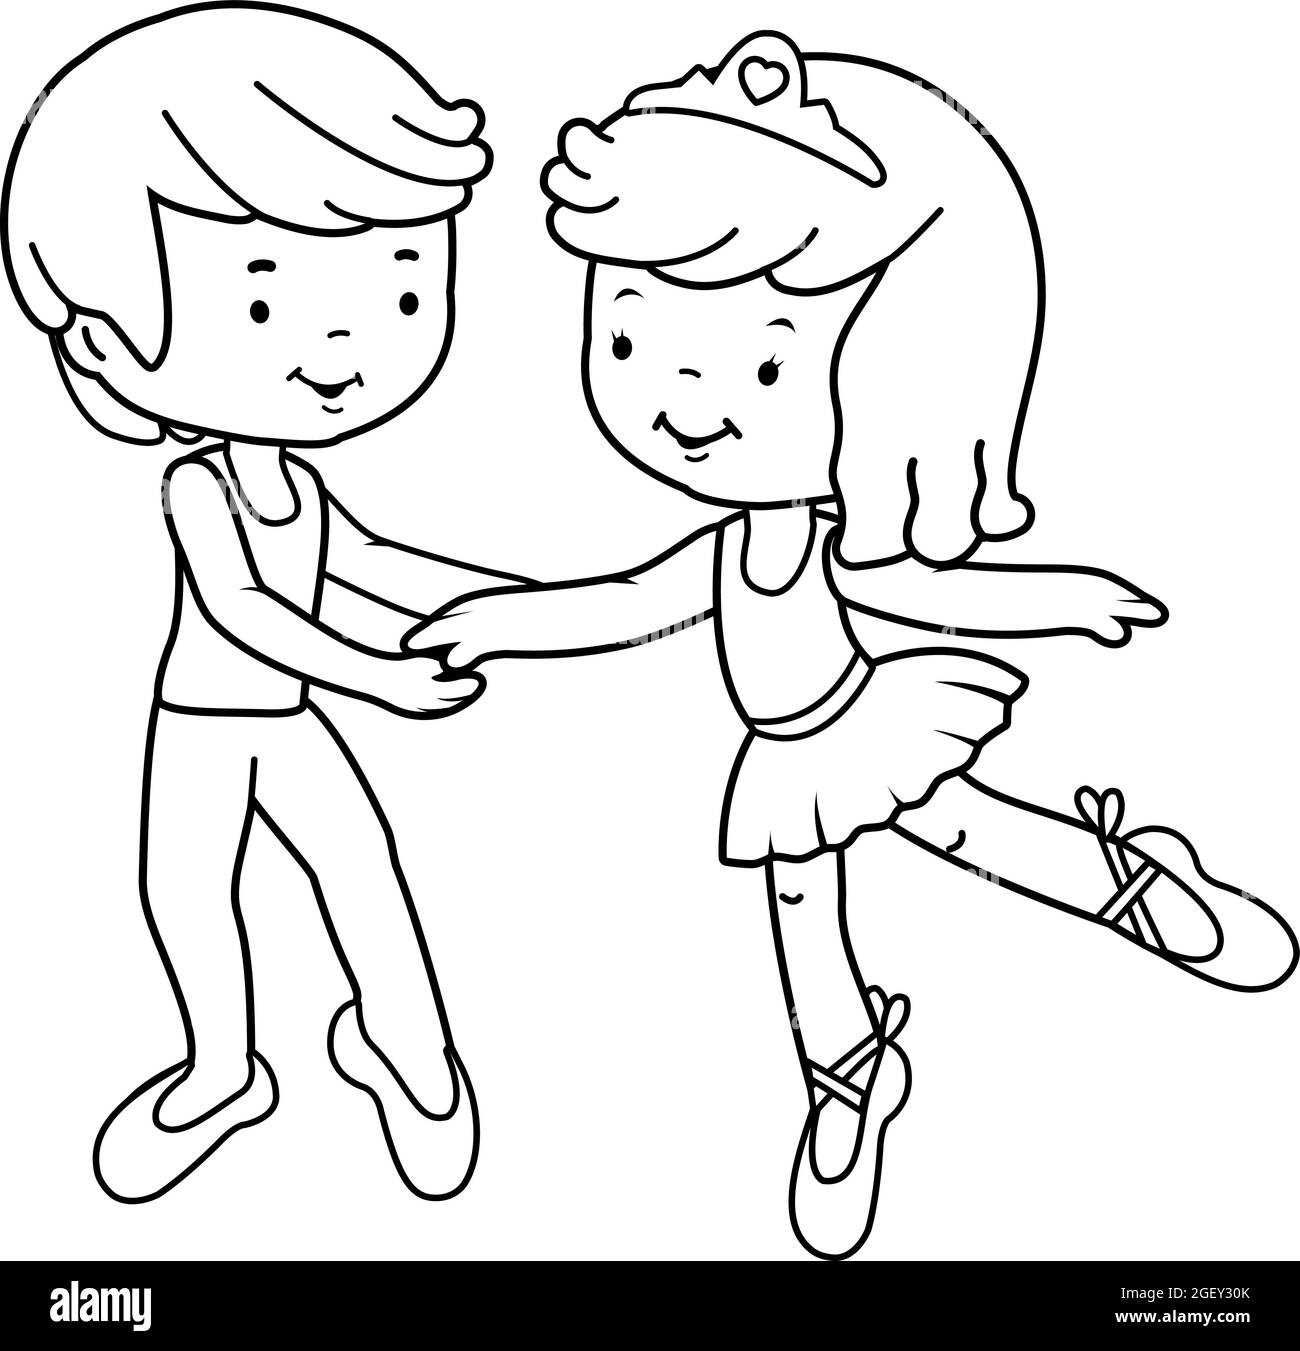 Little Boy And Girl Ballet Dancers. Vector Black And White Coloring Page  Stock Vector Image & Art - Alamy